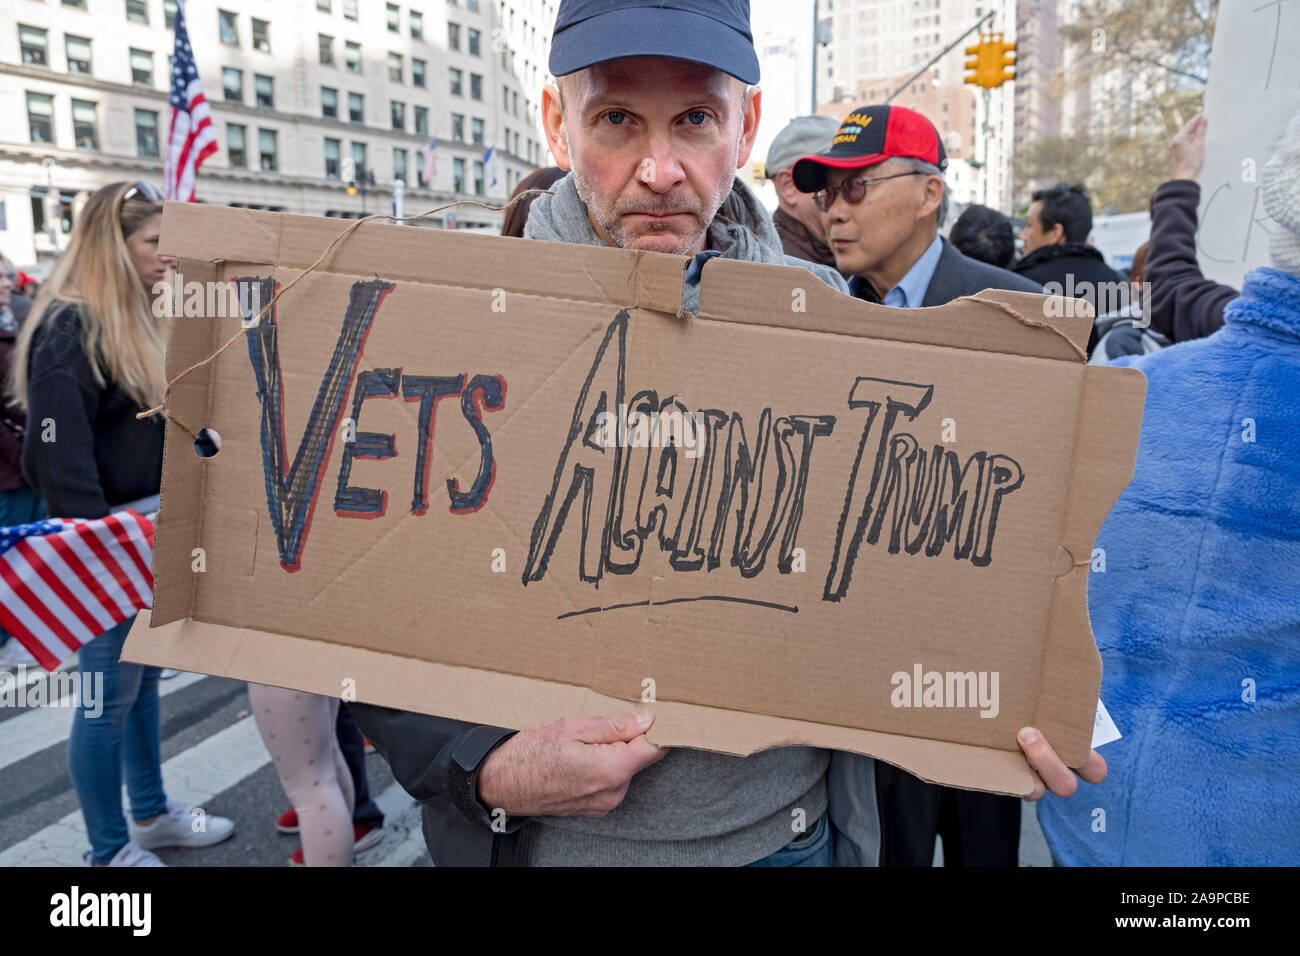 An angry veteran carries a homemade VETS AGAINST TRUMP sign at the Veteran's Day parade on Fifth Avenue in Manhattan, New York City Stock Photo